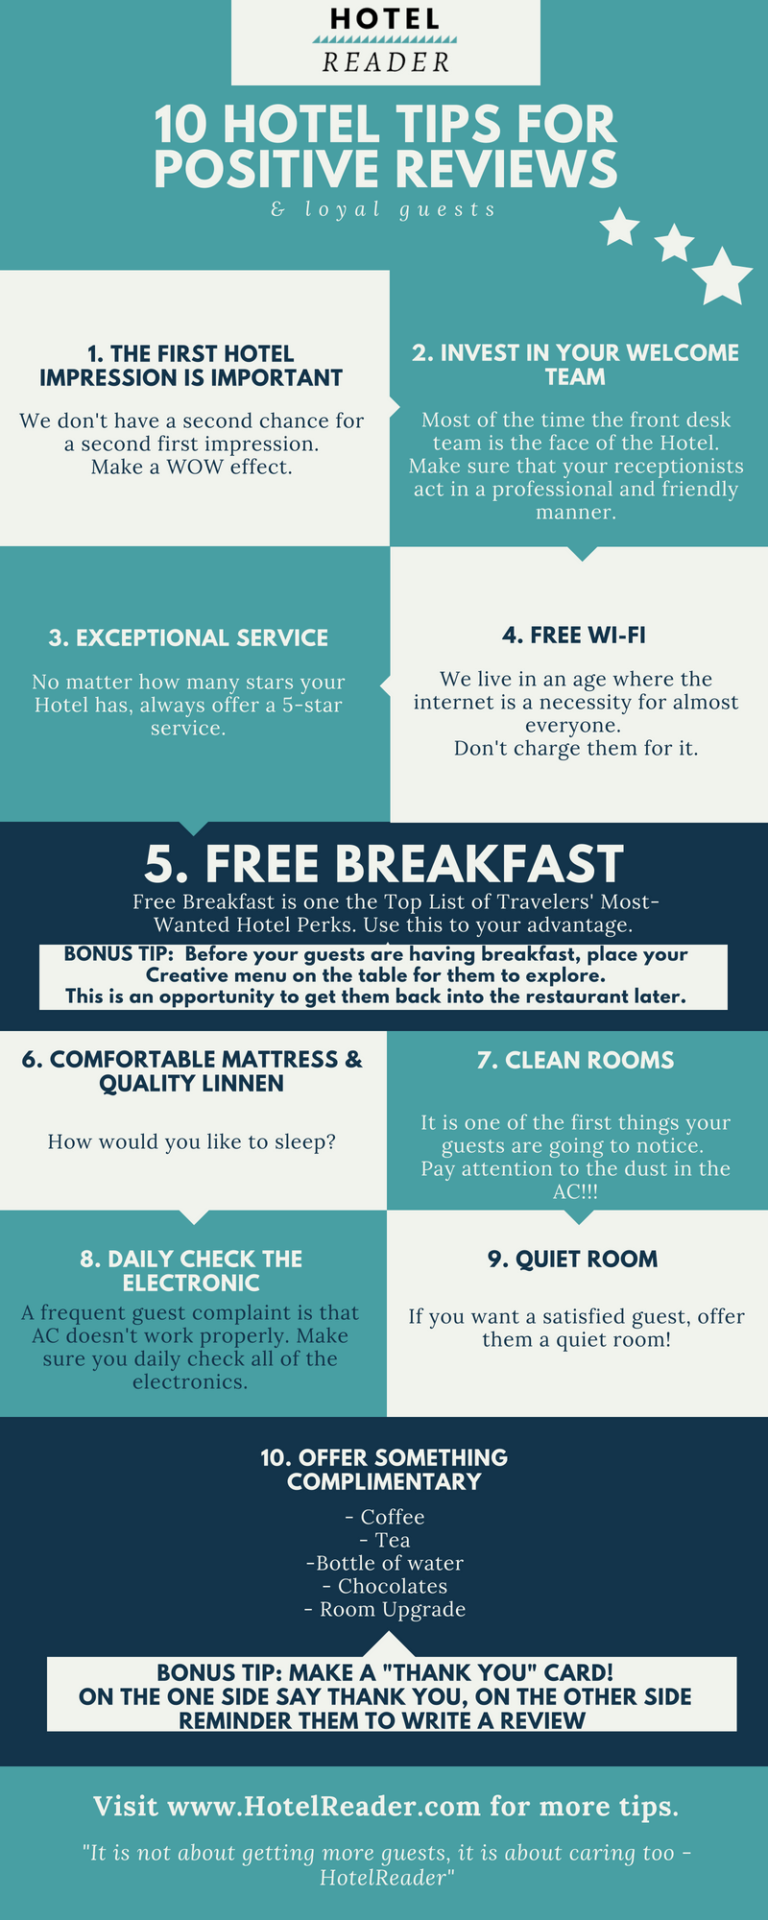 10 Best Tips For Positive Hotel Reviews [infographic] Hotel Reader